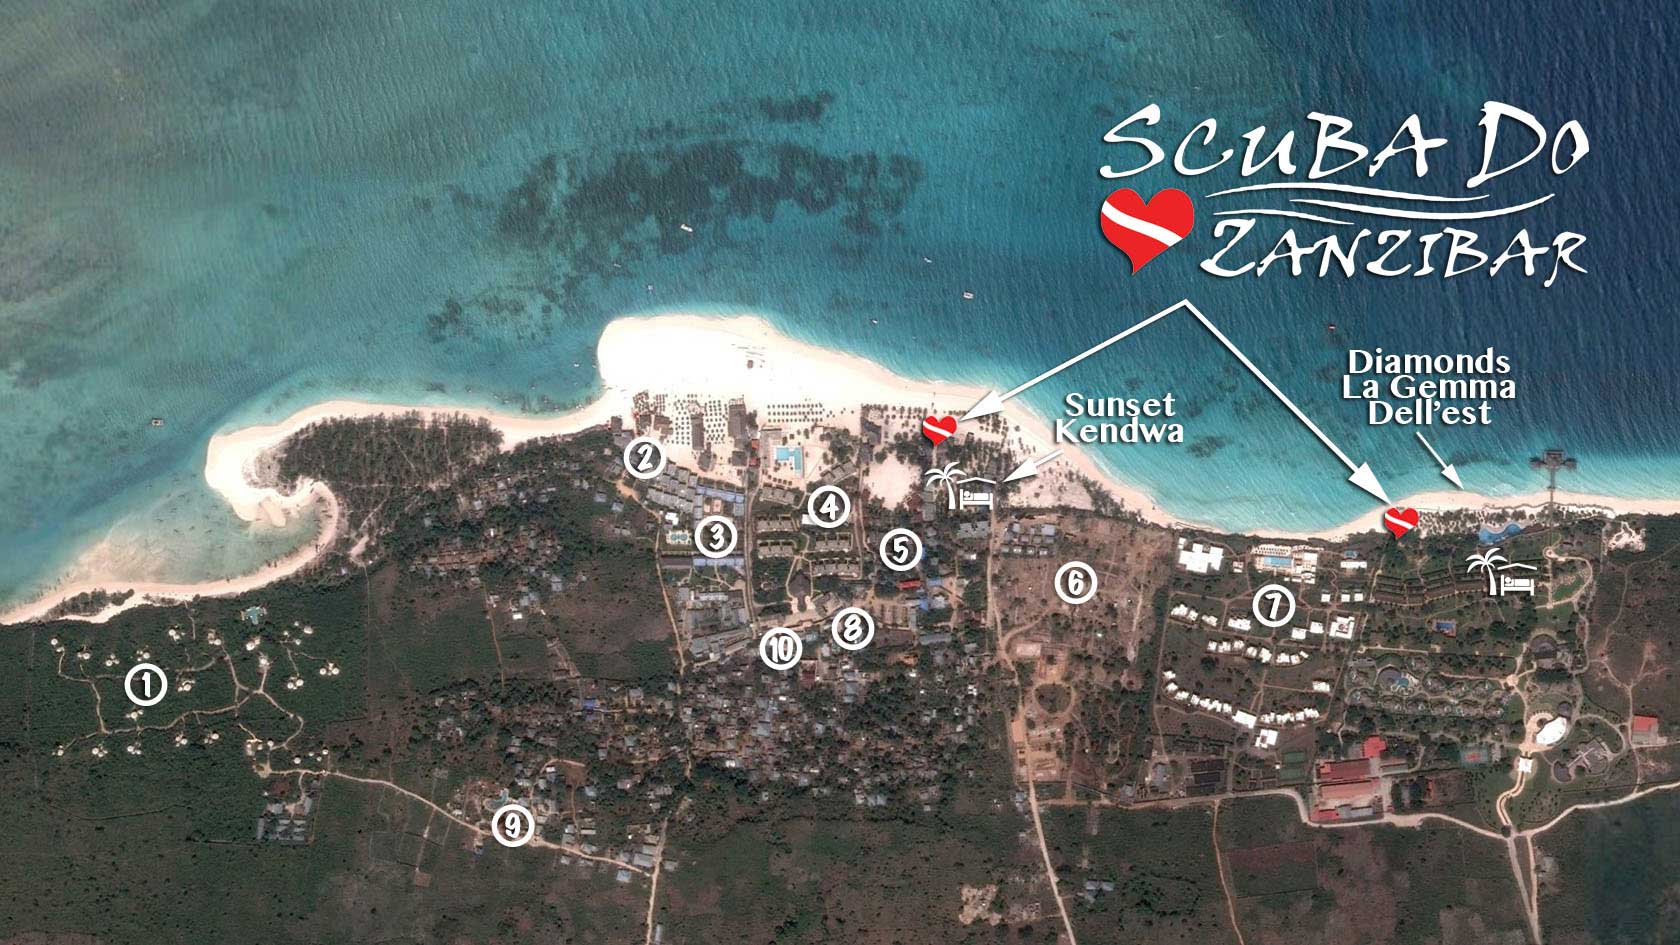 Map of Kendwa Beach highlighting all accommodation options with reference to our divebase locations - numbers coorespond to the properties pictured below